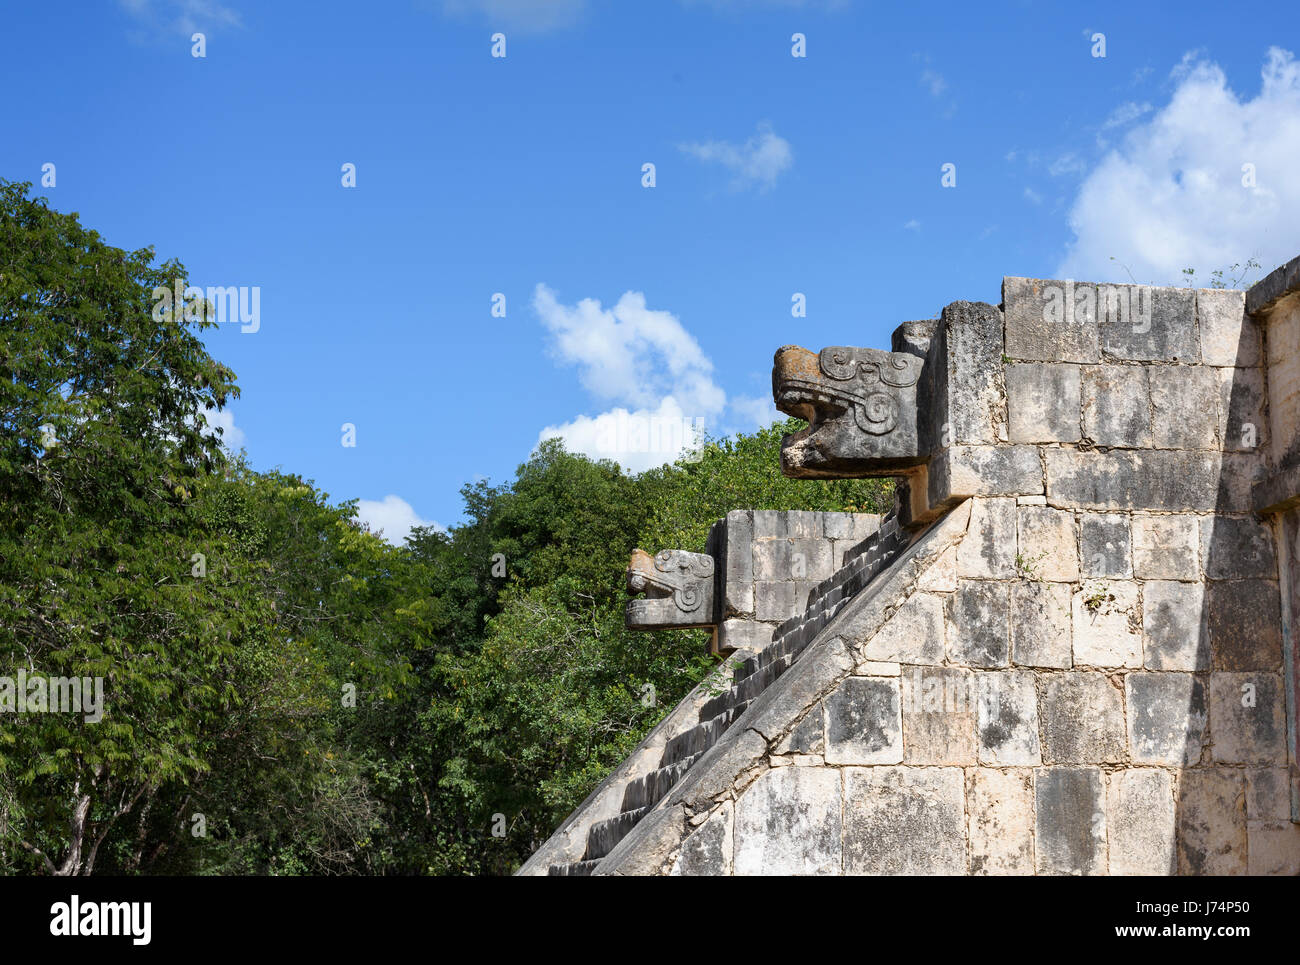 stone jaguar head statue at the Platform of the Eagles and Jaguars in Mayan Ruins of Chichen Itza, Mexico Stock Photo